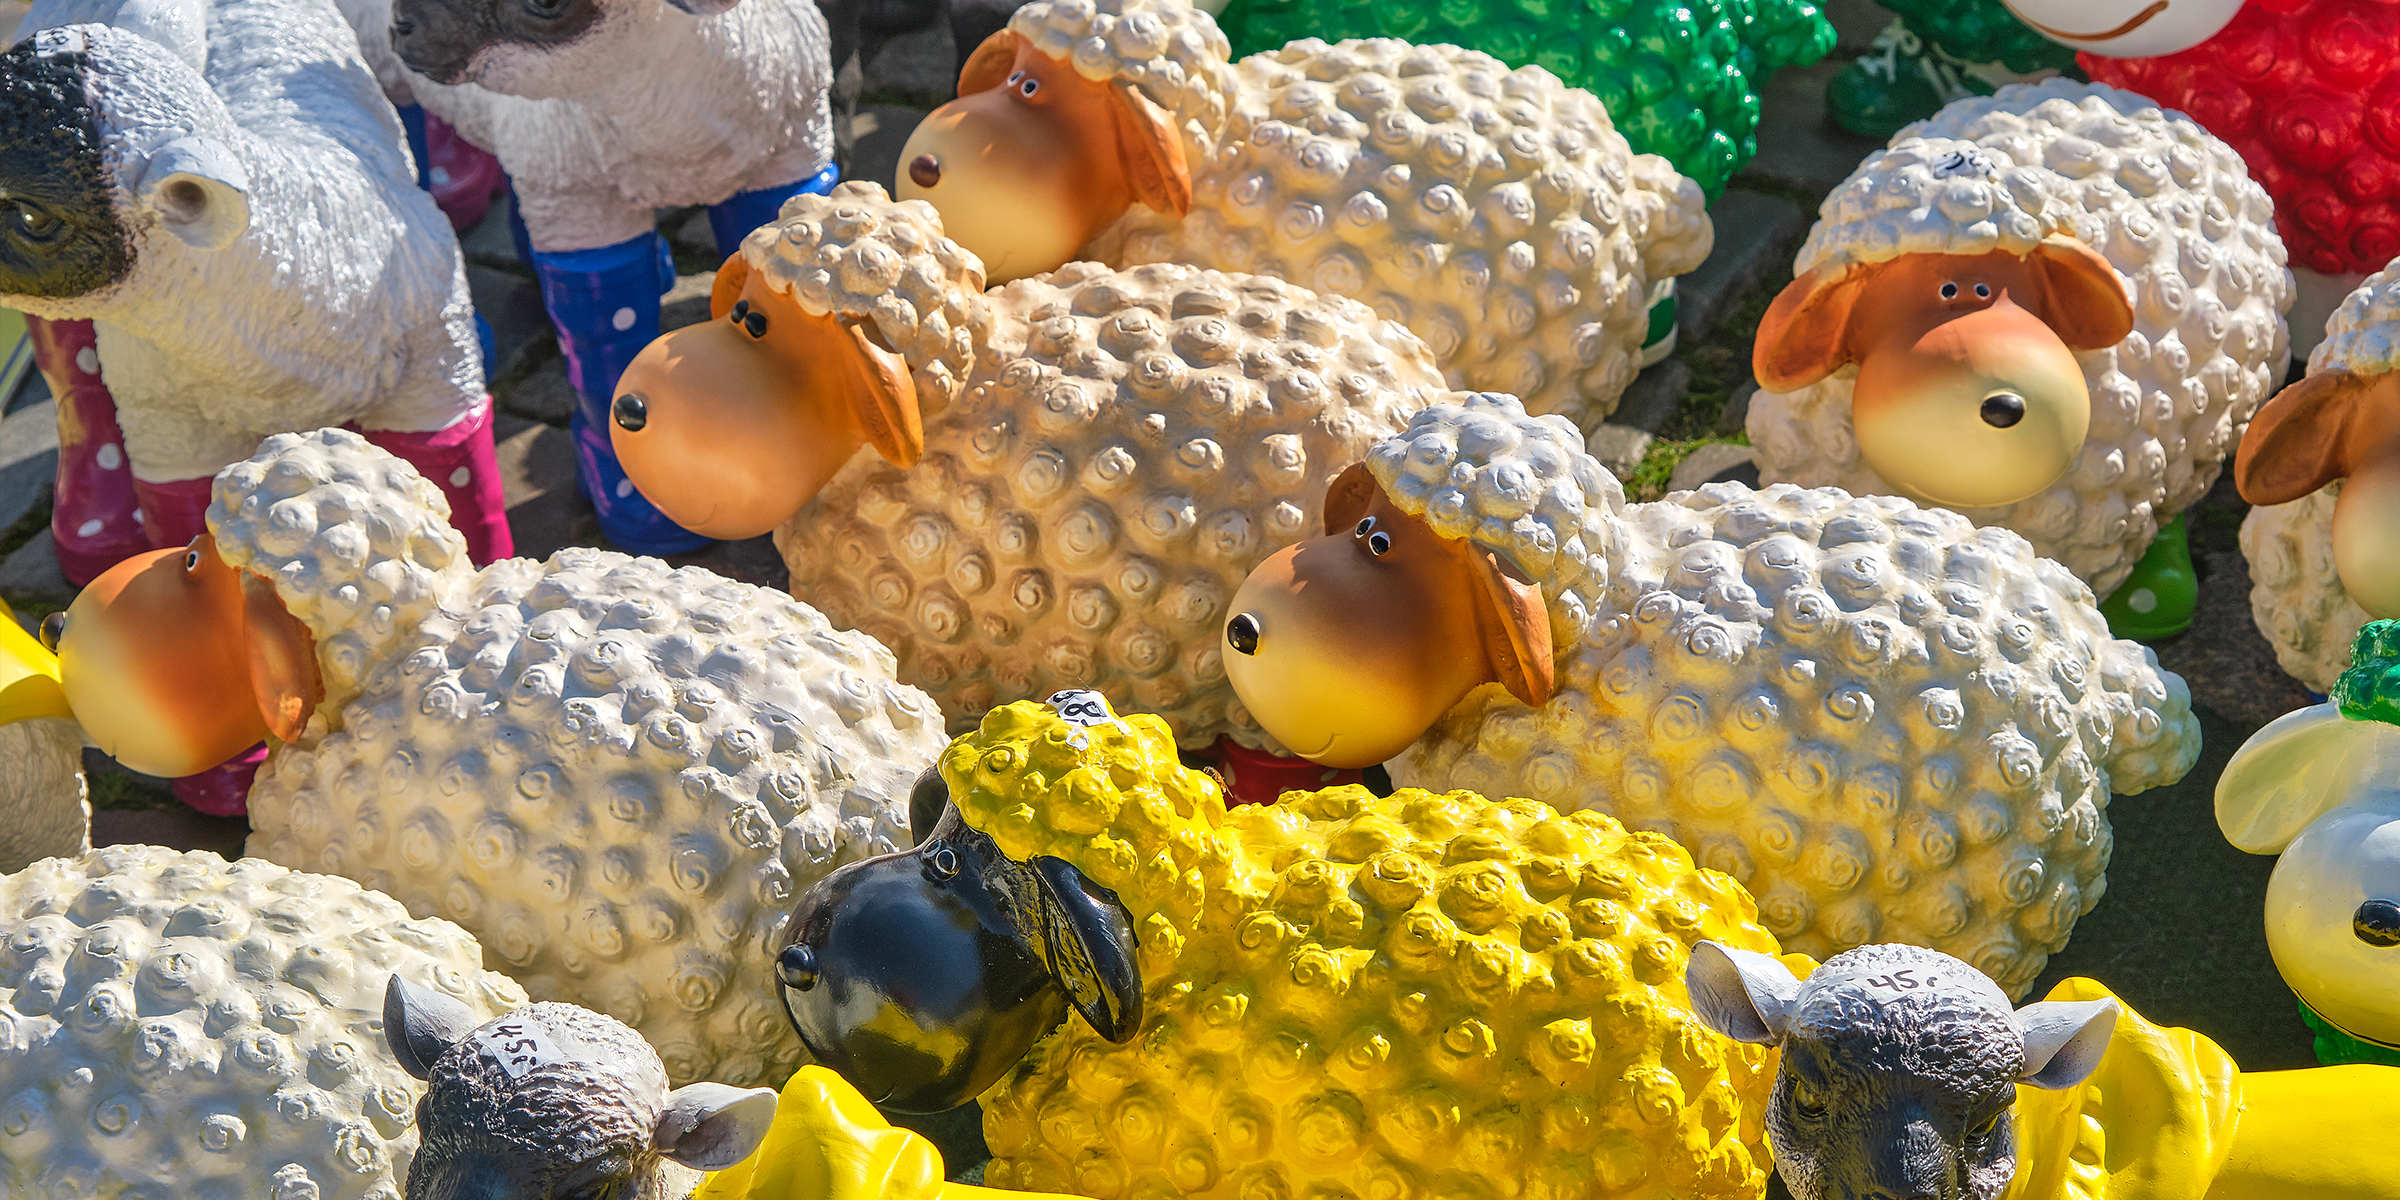 Collection of plastic sheep | Source: Getty images